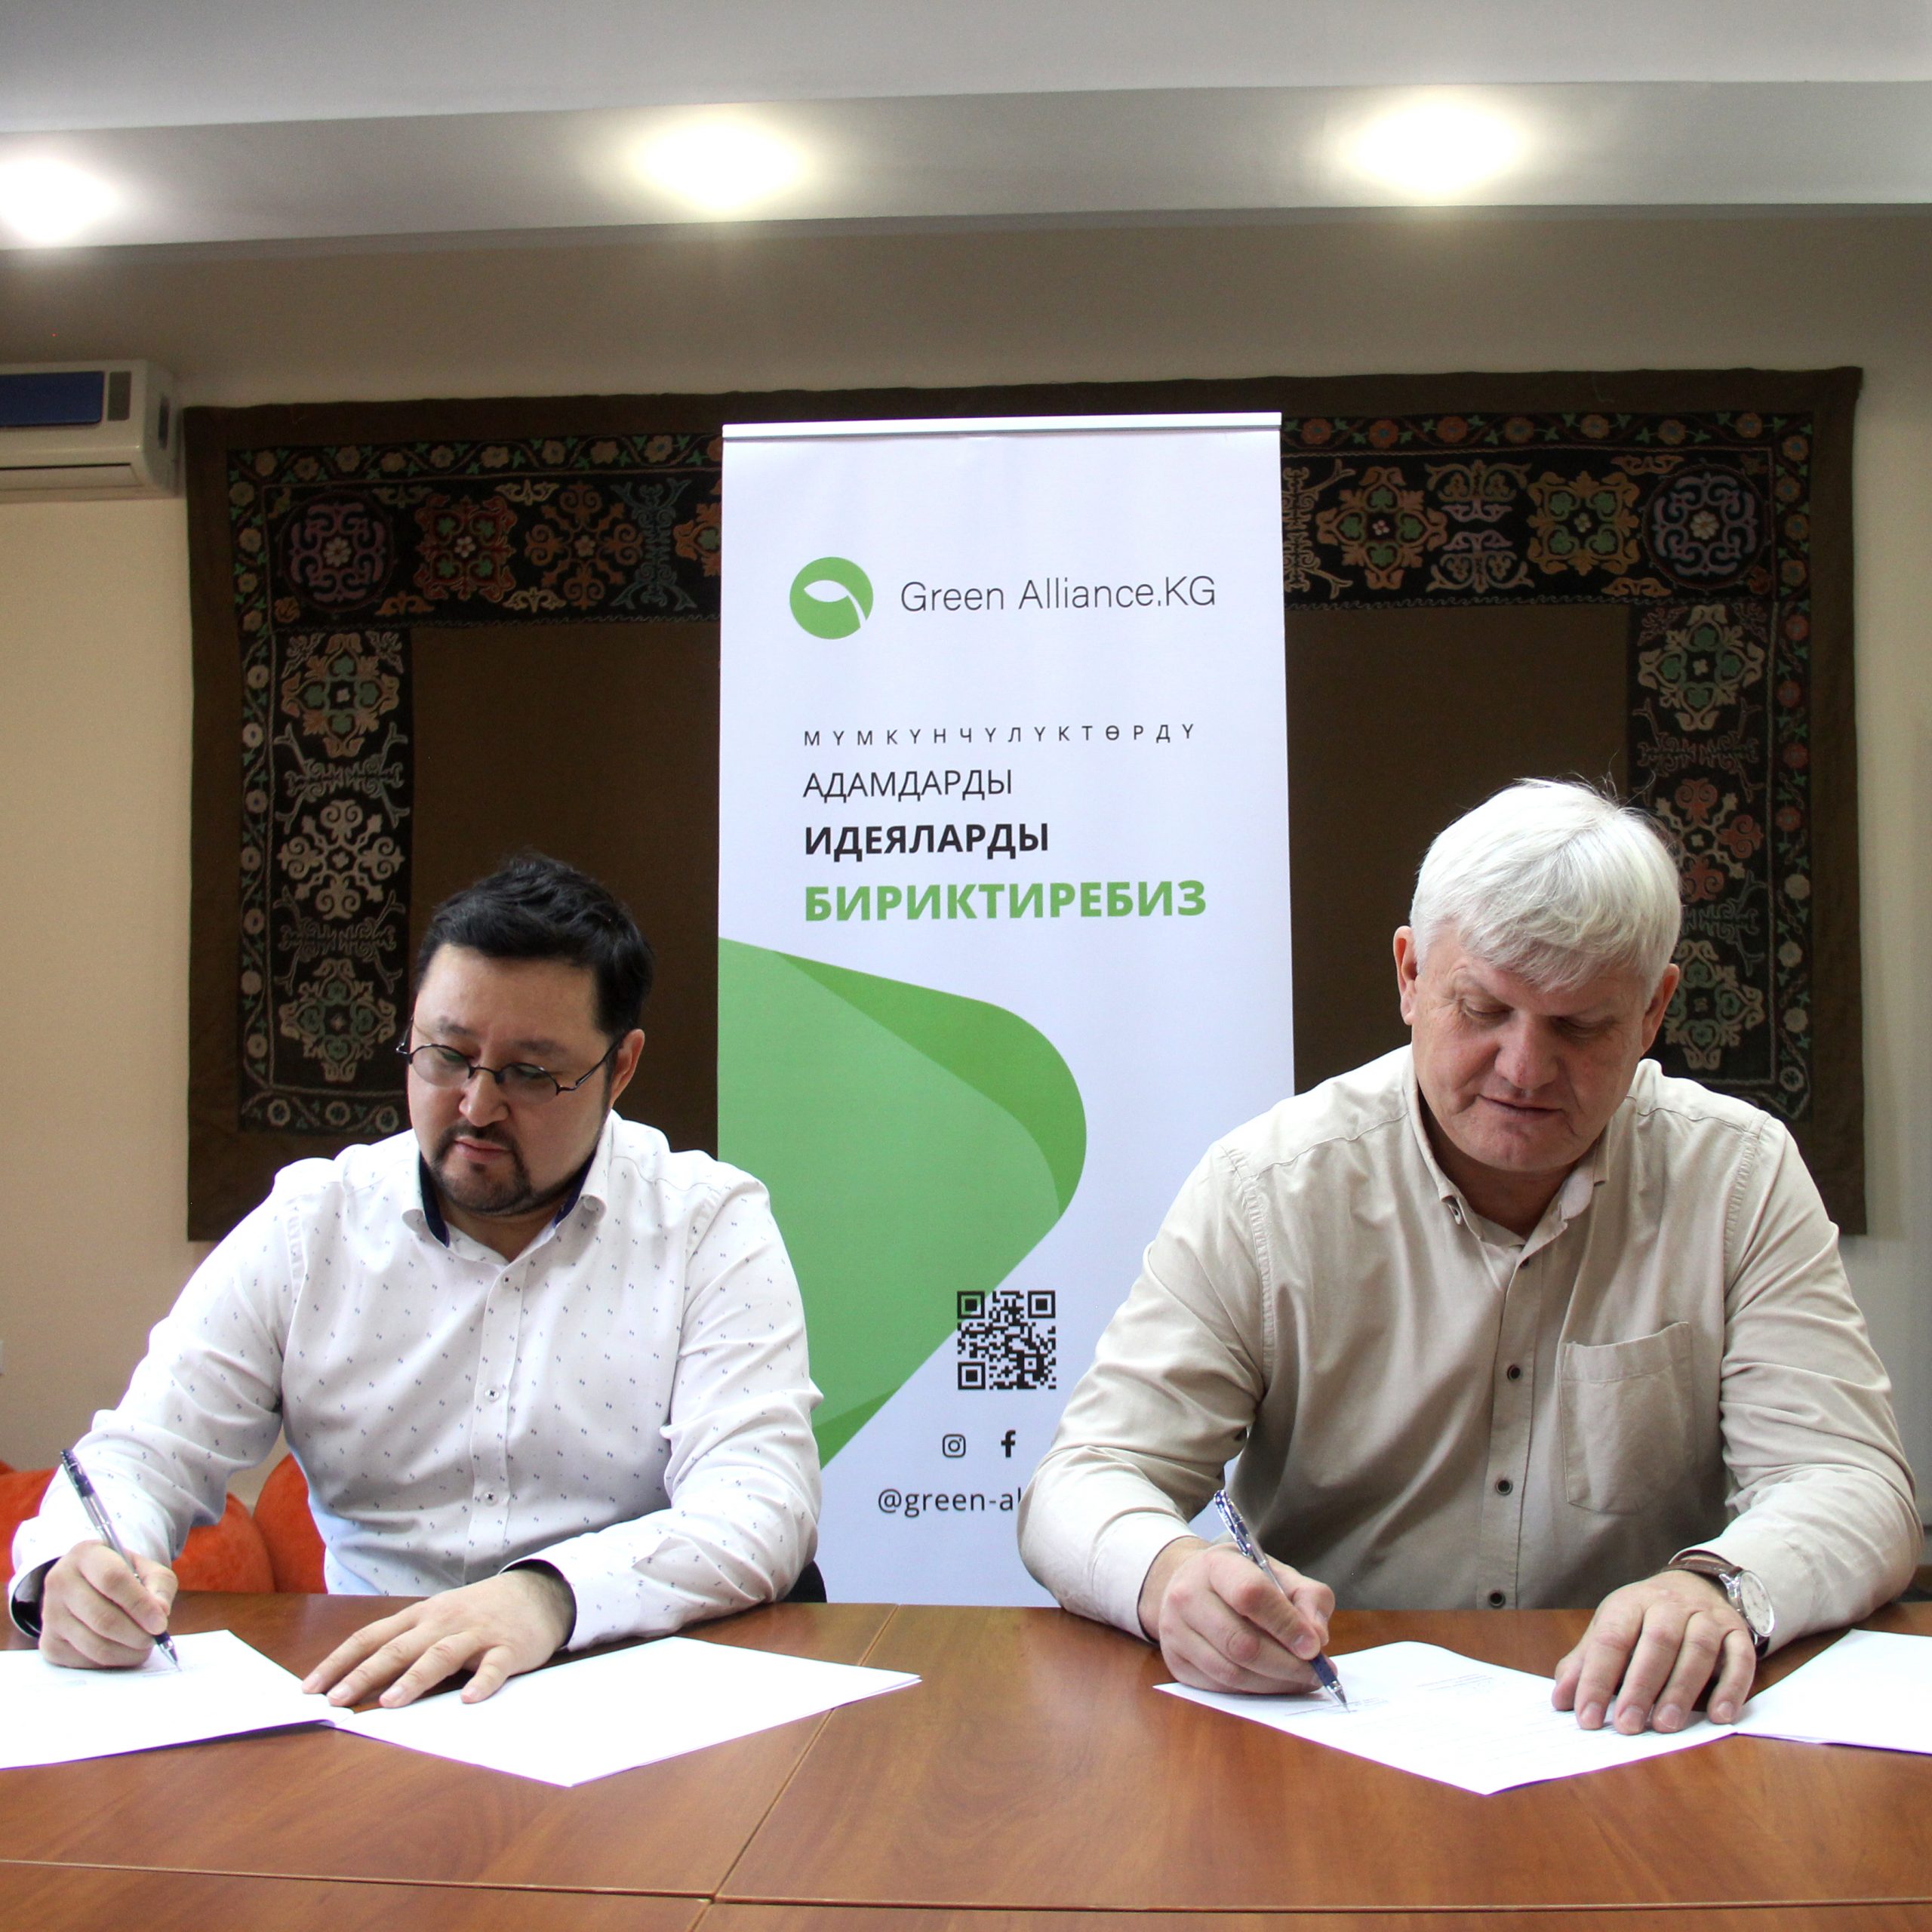 THERMOFLEX IS A NEW MEMBER OF GREEN ALLIANCE KG